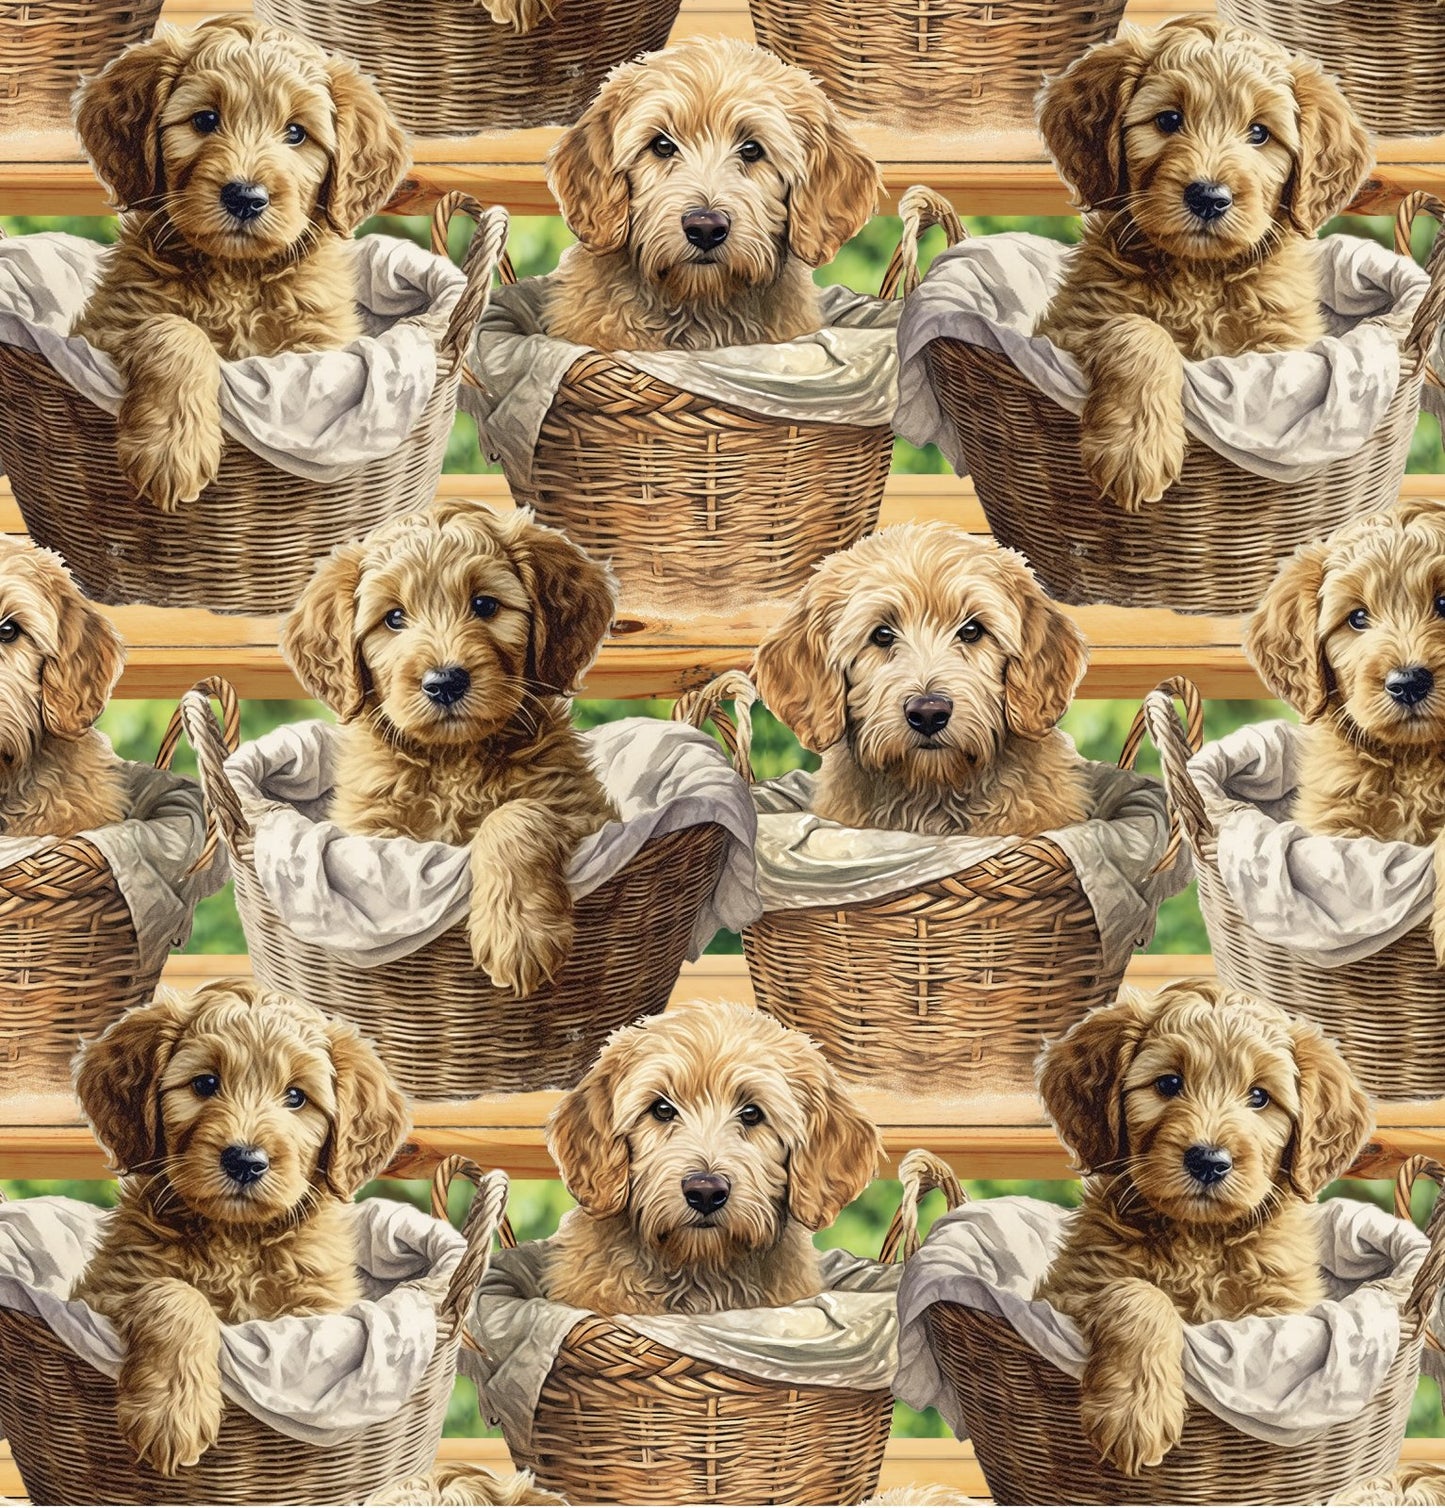 GOLDENDOODLE DOG BREED cotton fabric by the half yard DAVID TEXTILES!